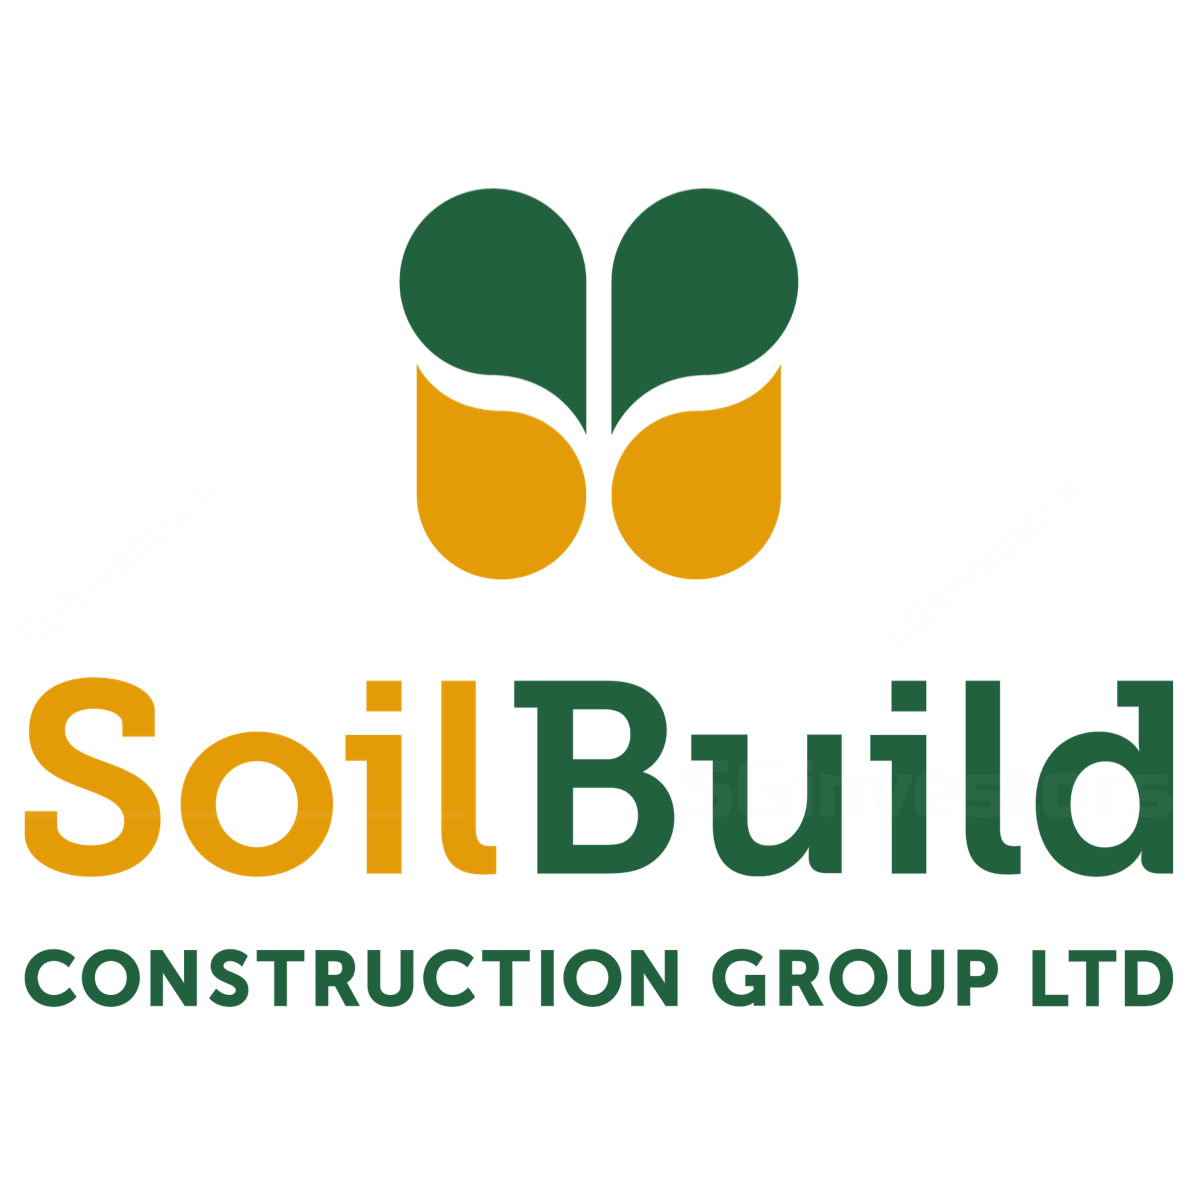 Soilbuild Construction Group - CIMB Research 2018-04-09: Leading Builder In Singapore